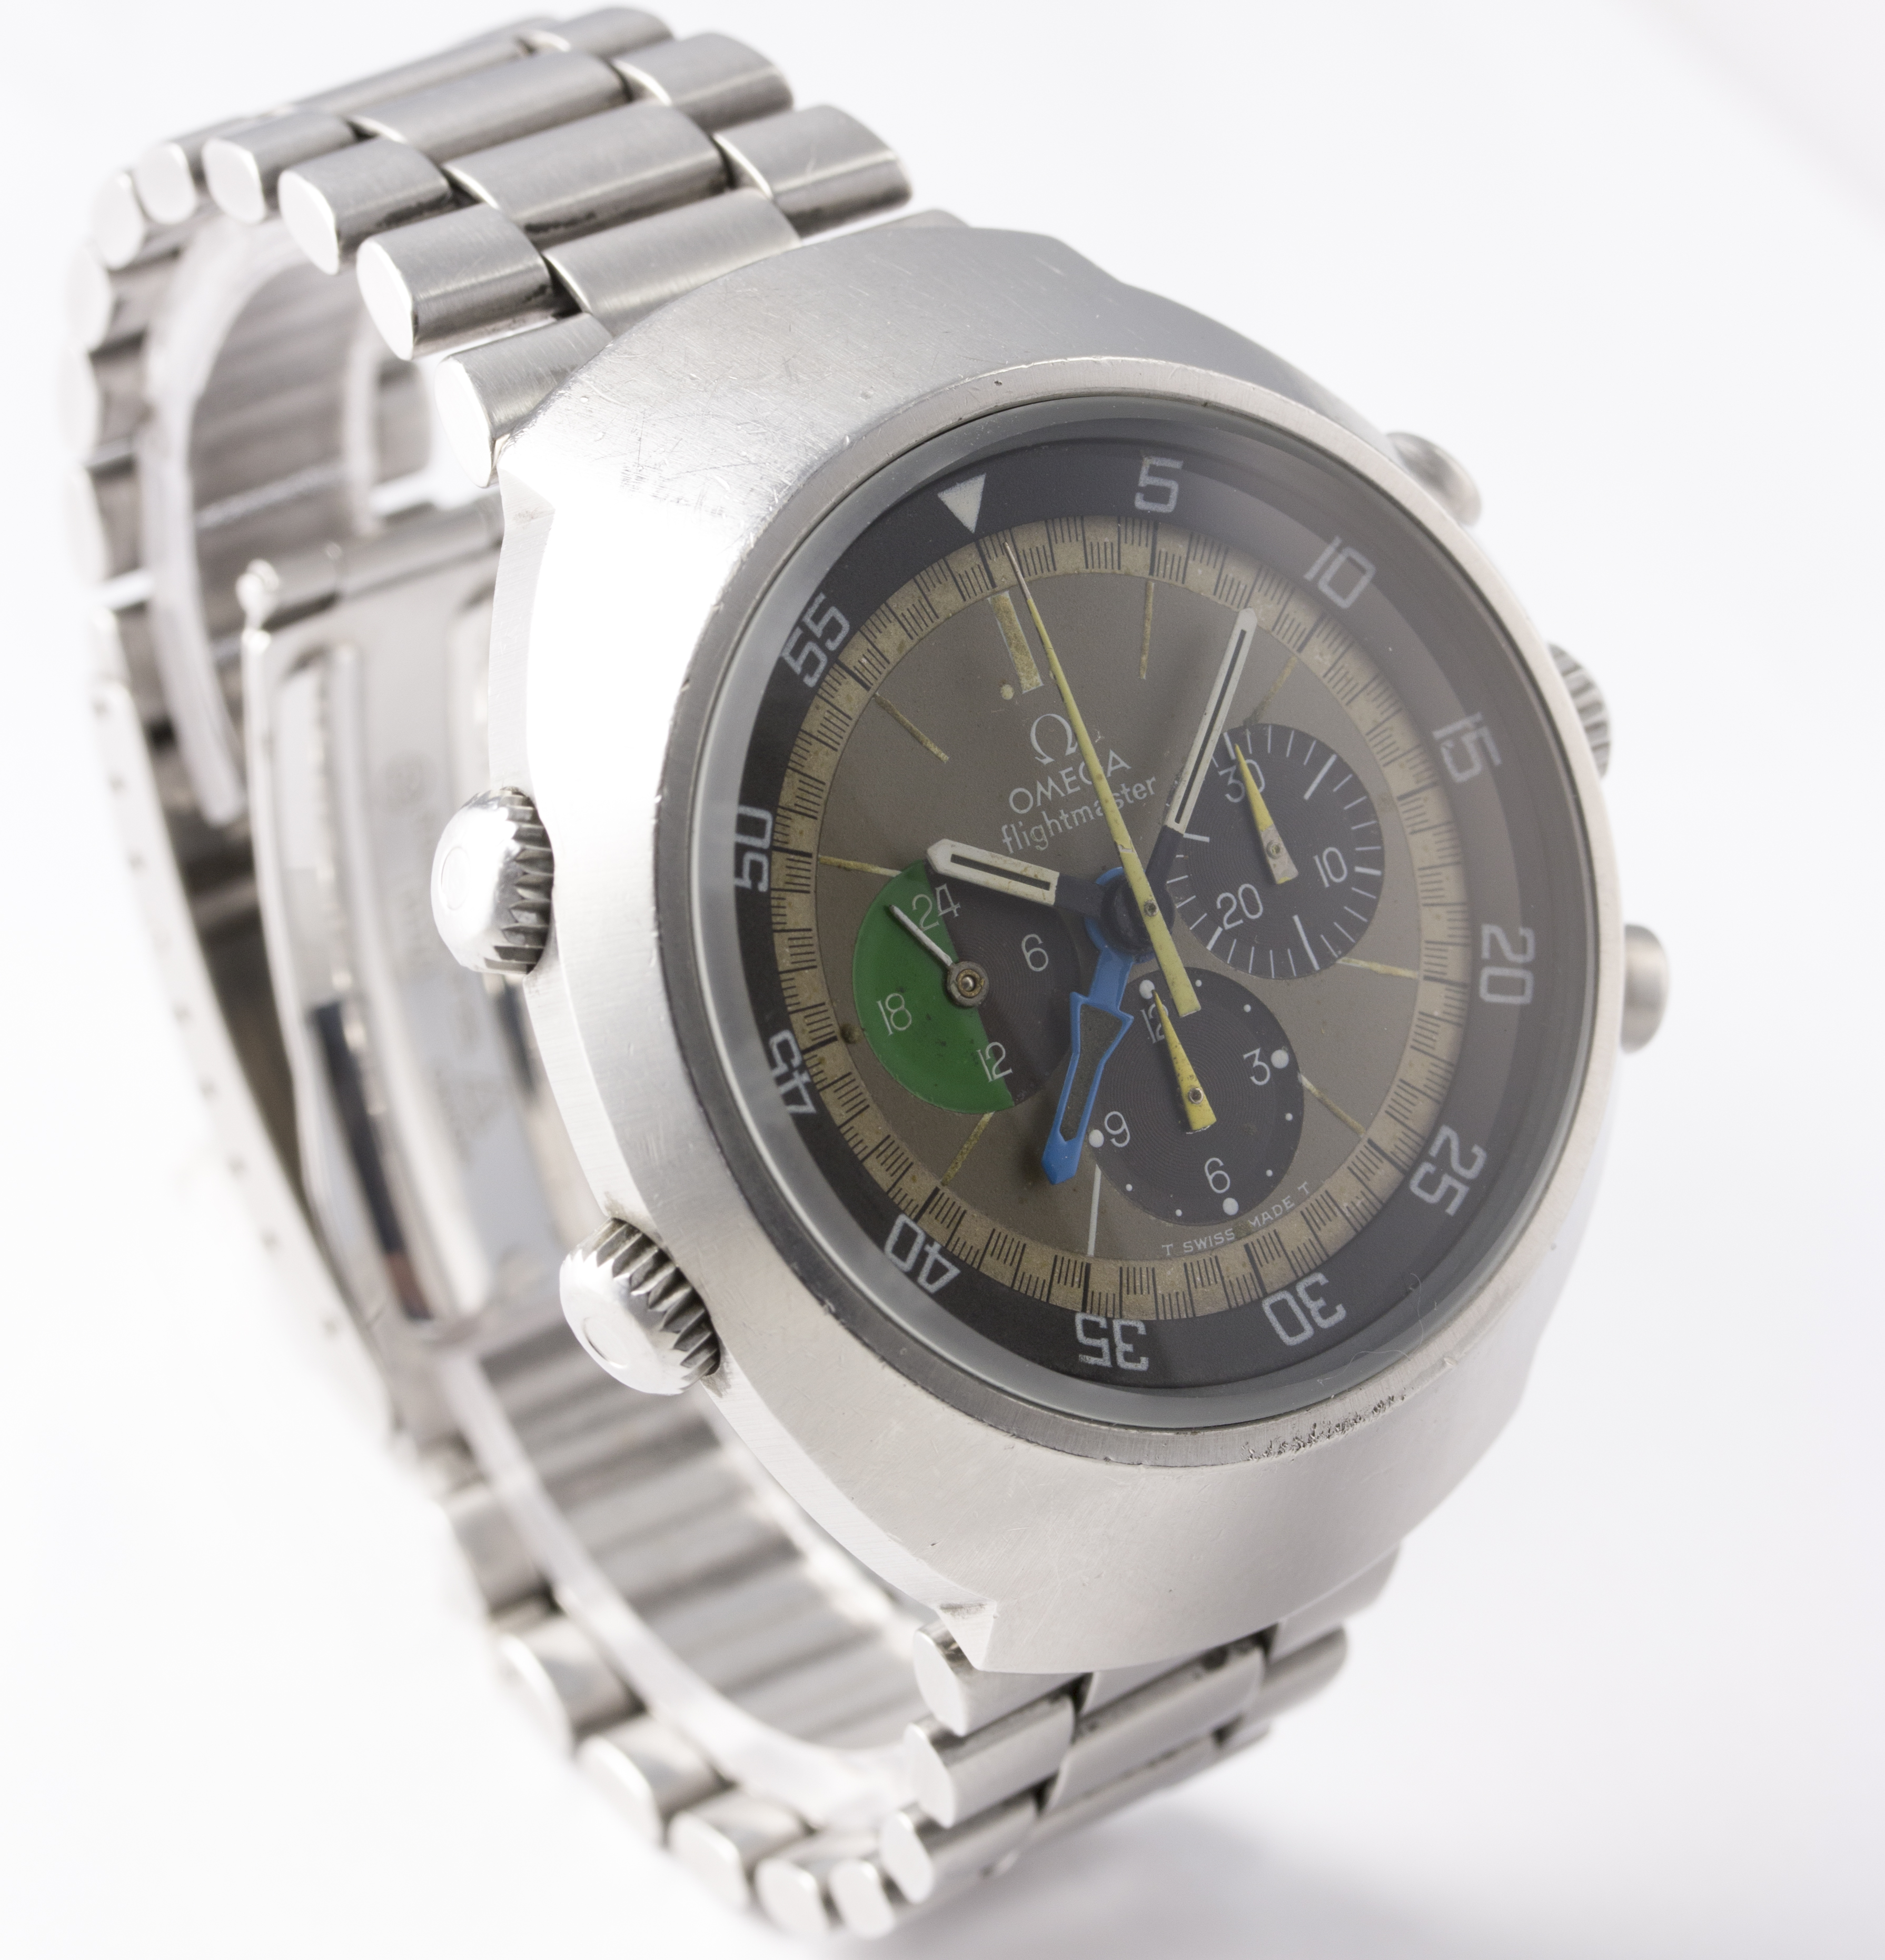 A RARE GENTLEMAN’S STAINLESS STEEL OMEGA FLIGHTMASTER CHRONOGRAPH BRACELET WATCH
CIRCA 1970, REF. 14 - Image 6 of 10